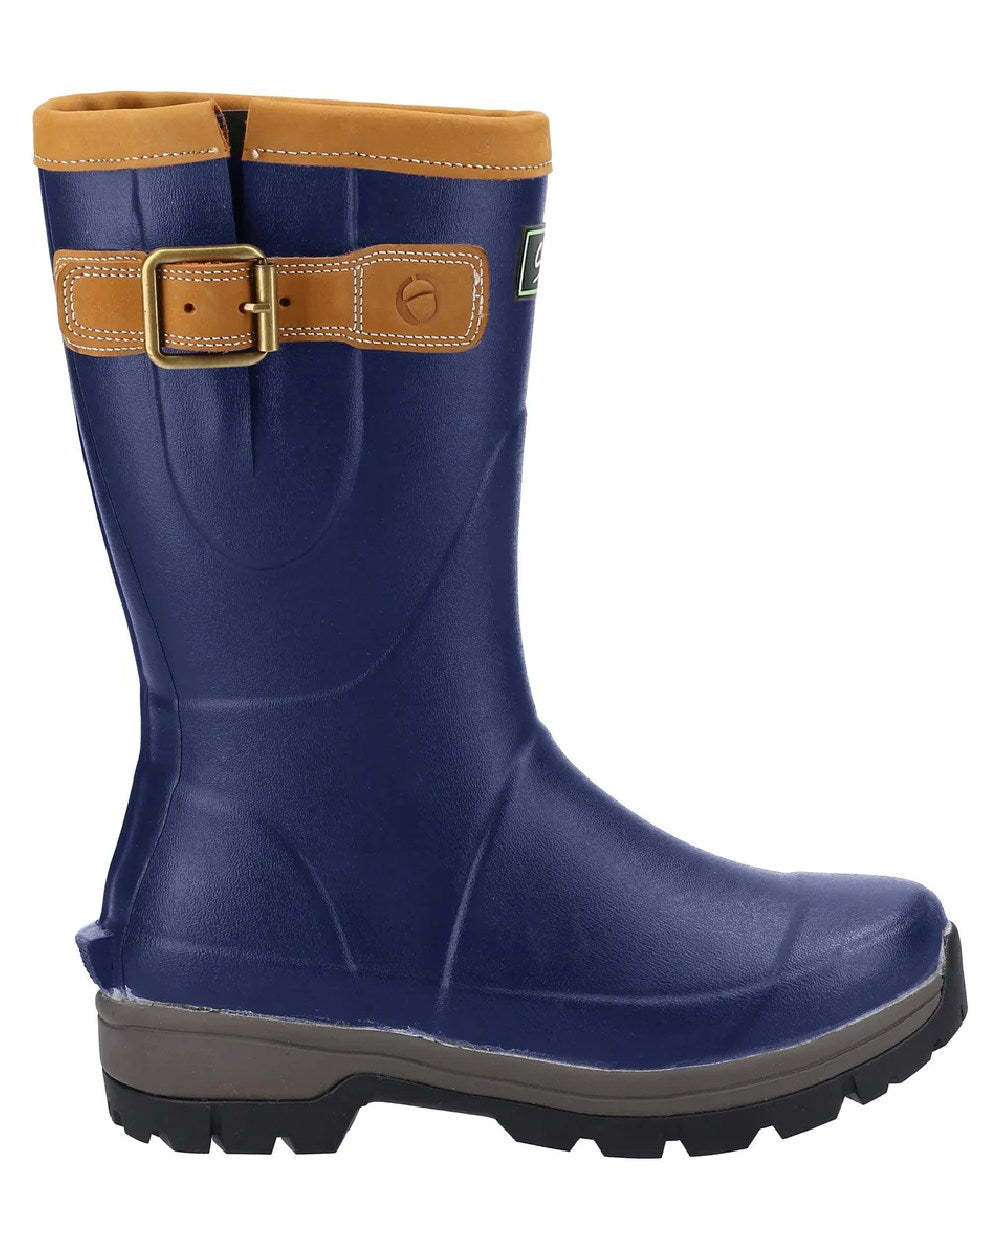 Cotswold Stratus Wellington Short Boots in Navy 